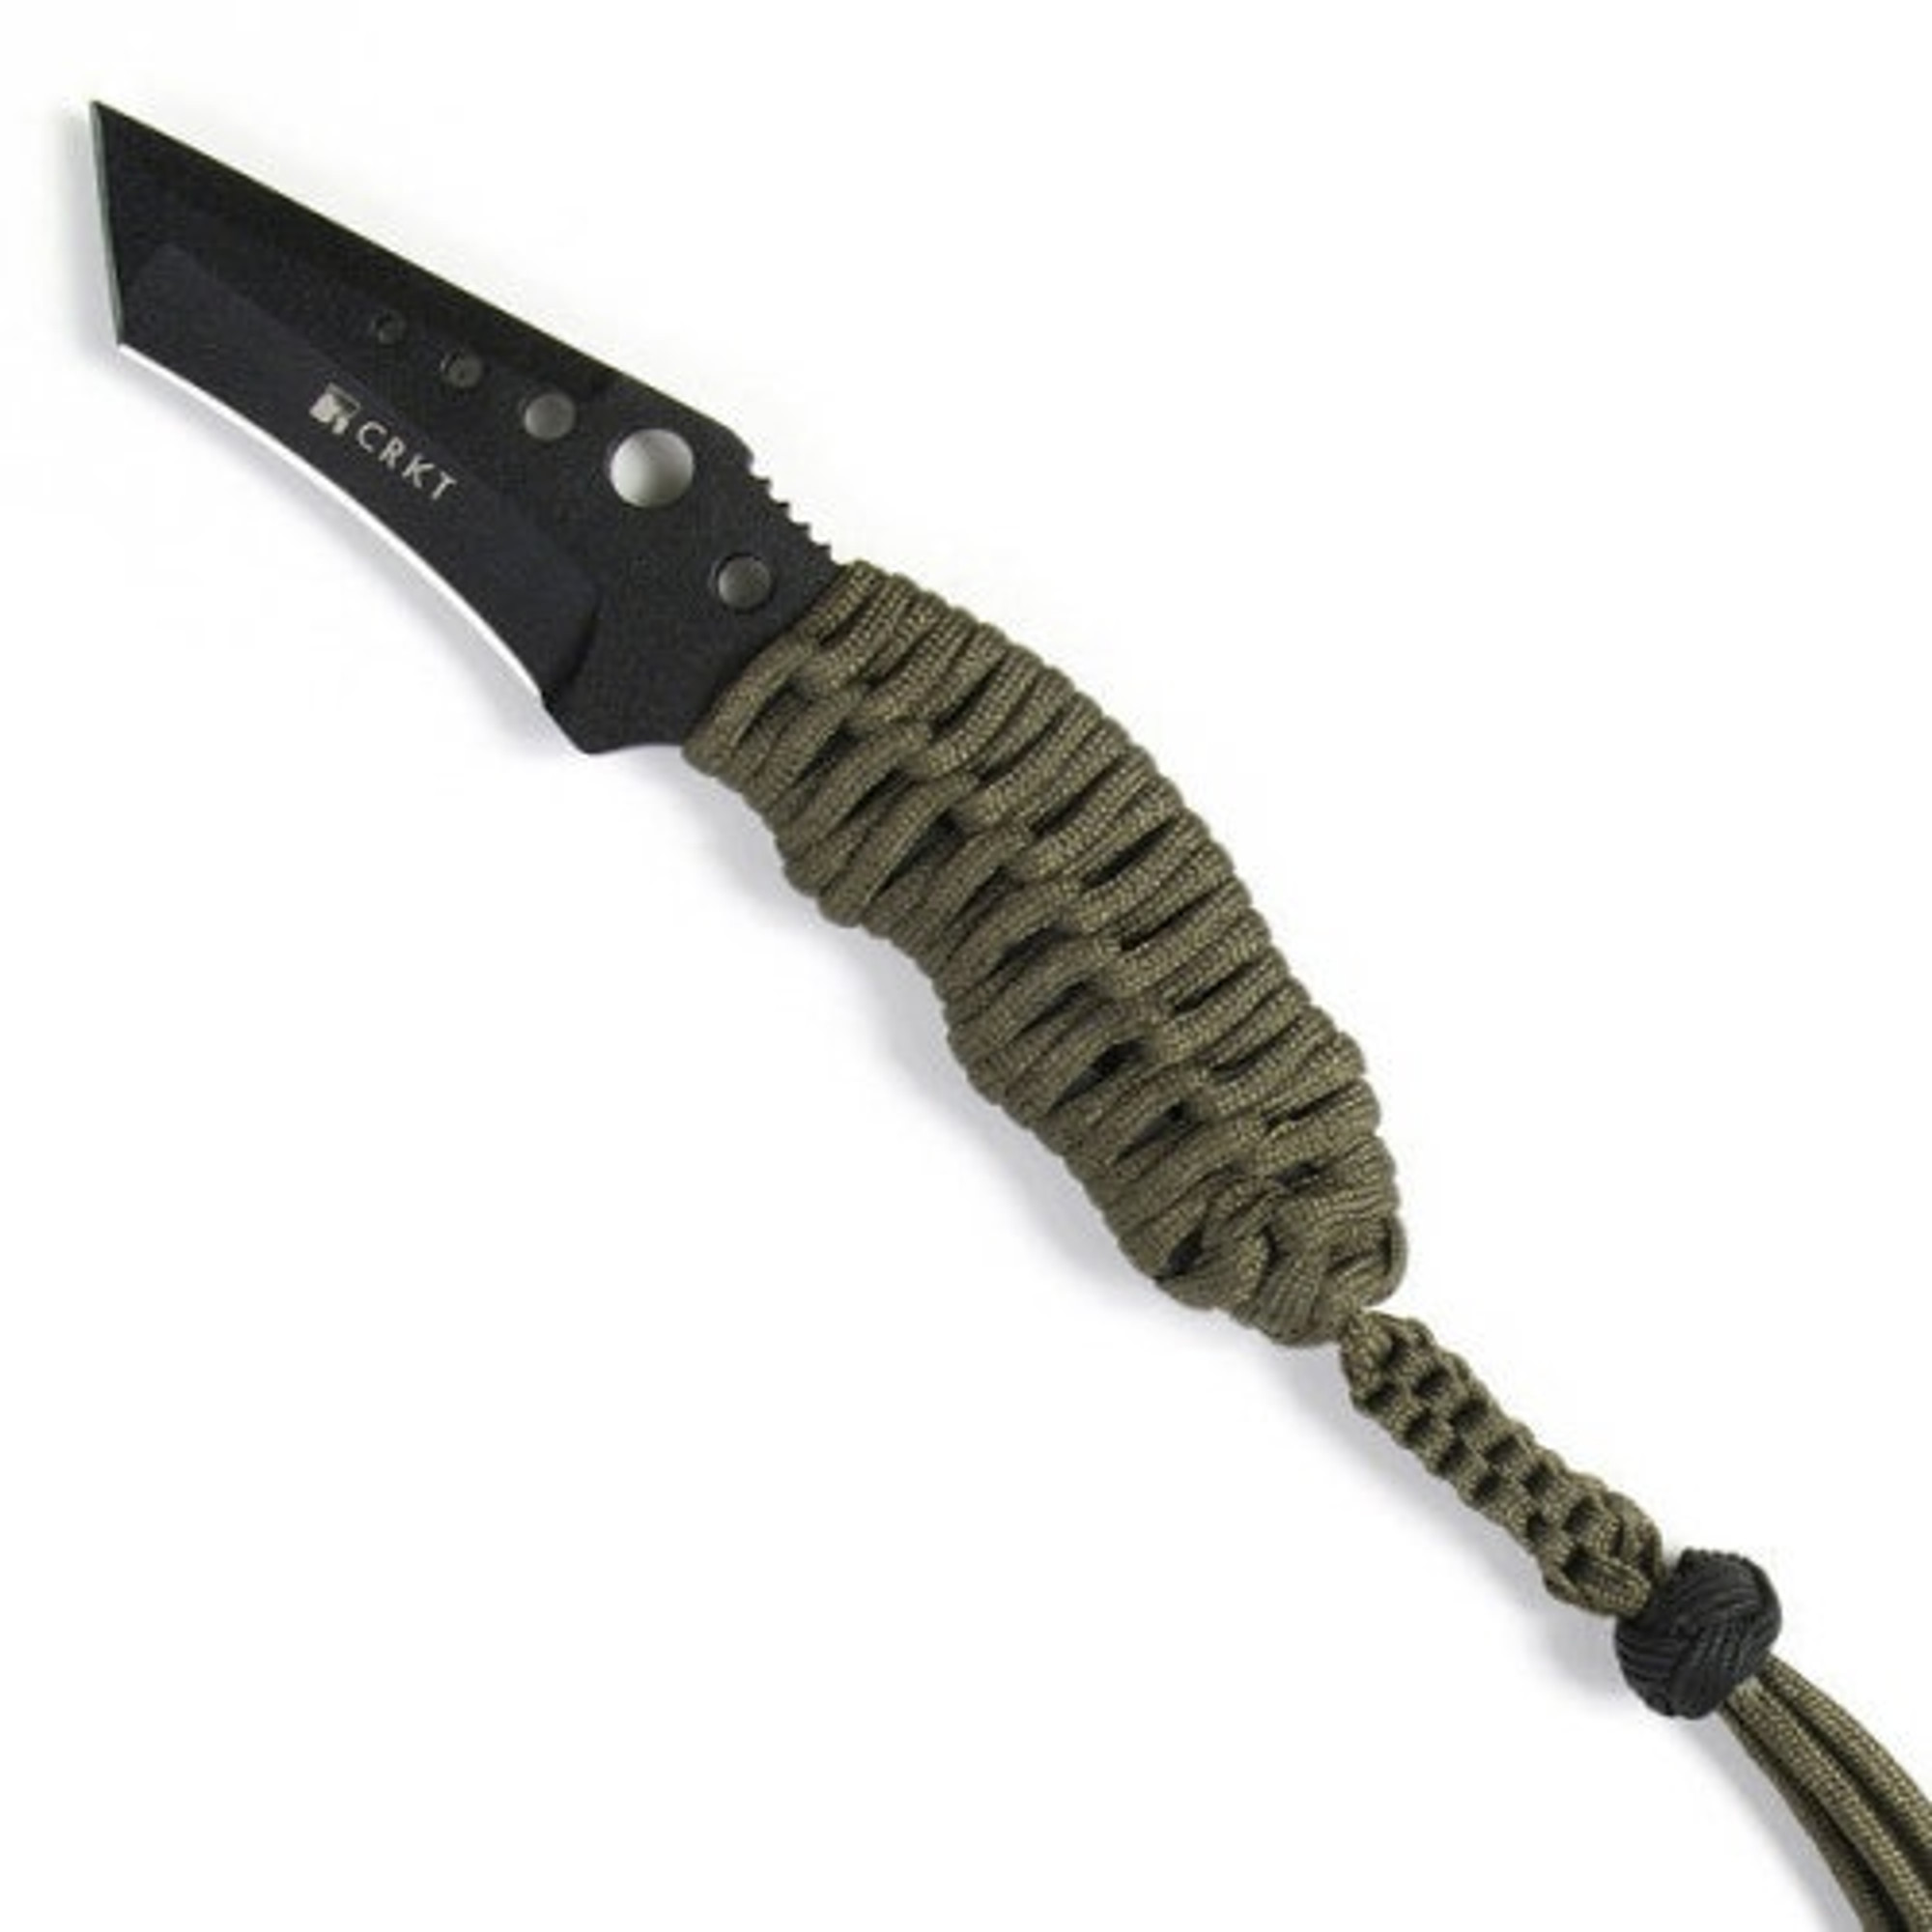 Columbia River Triumph Neck Knife - Cord Wrapped